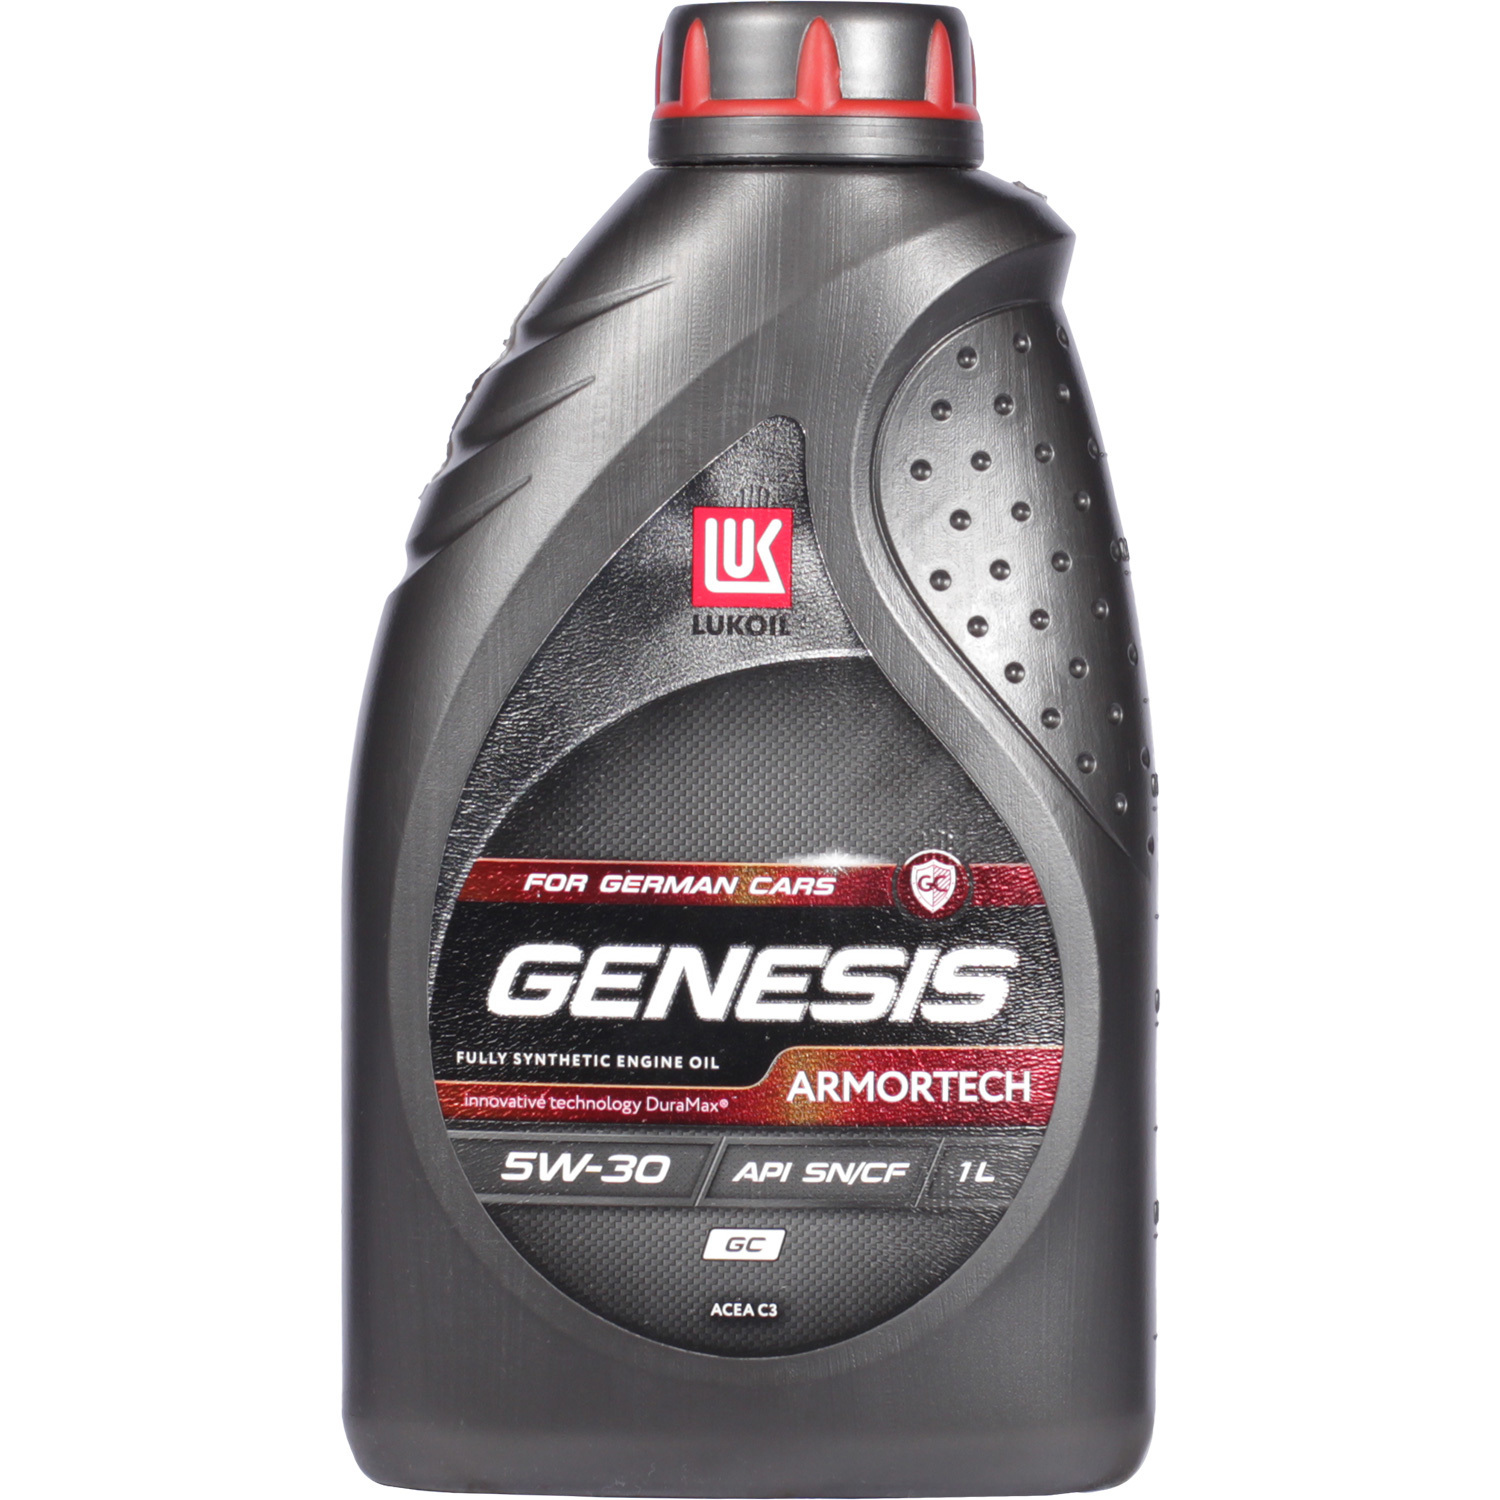 Lukoil Моторное масло Lukoil Genesis Armortech GC 5W-30, 1 л lukoil моторное масло lukoil genesis special vn 5w 30 57 л